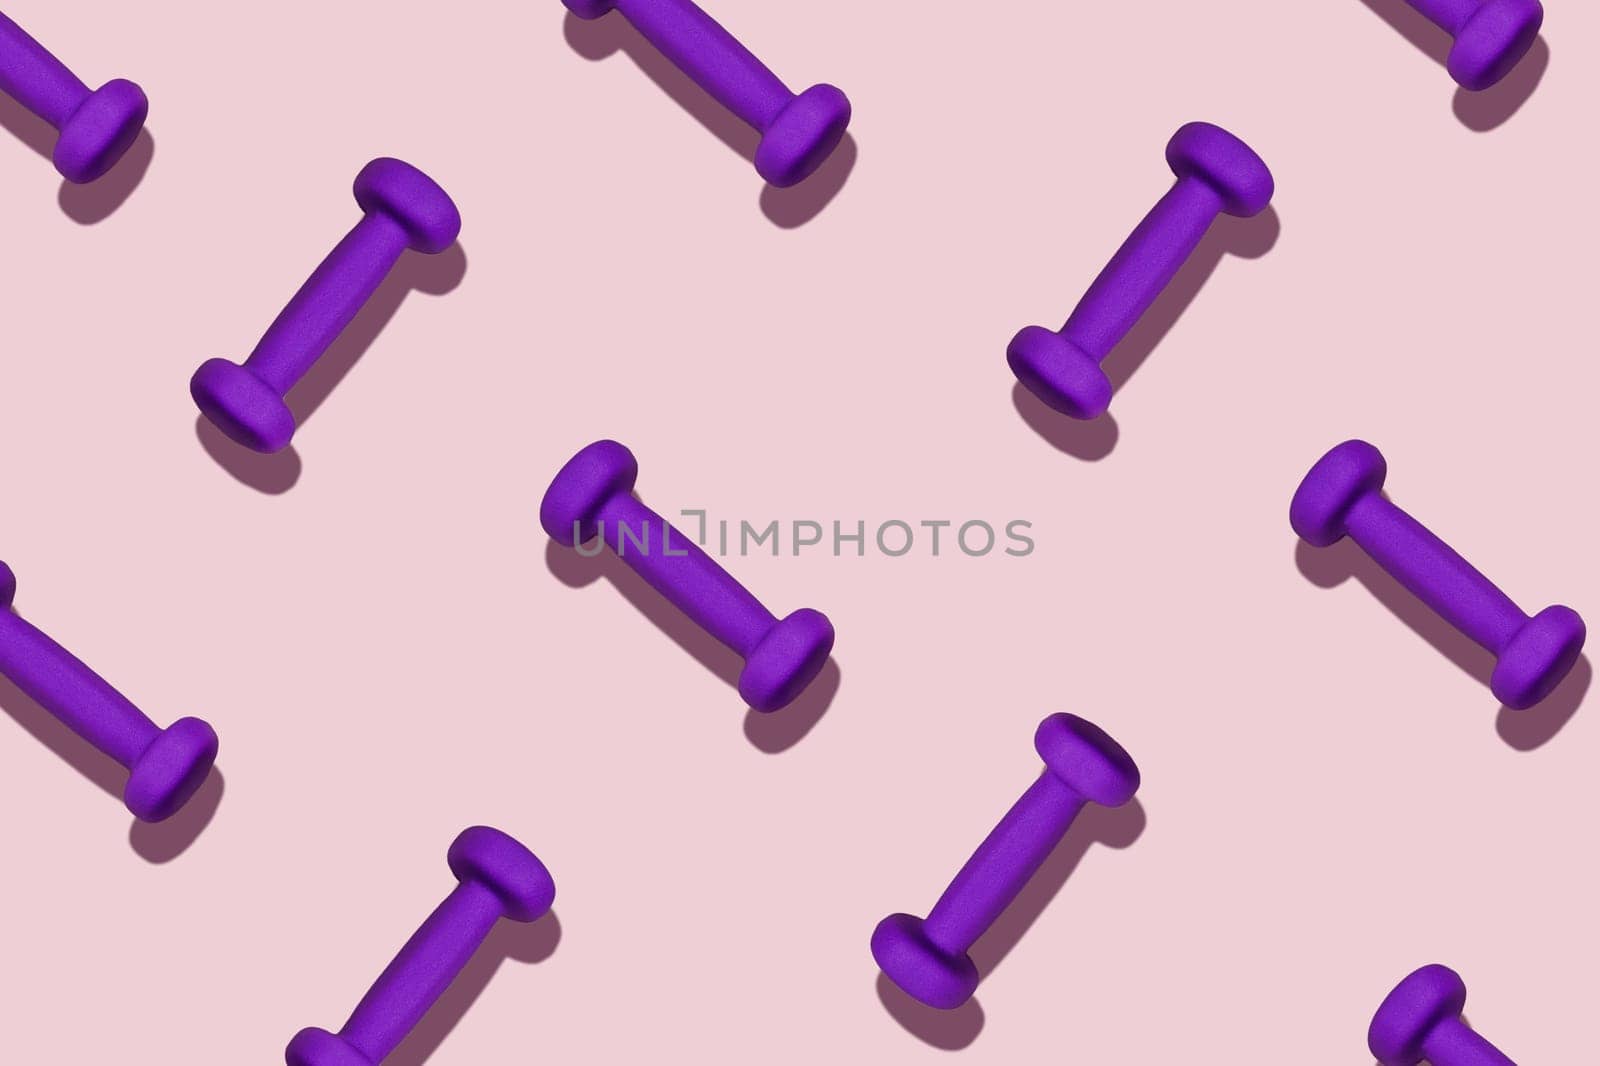 Group of purple dumbbells on a pink background.